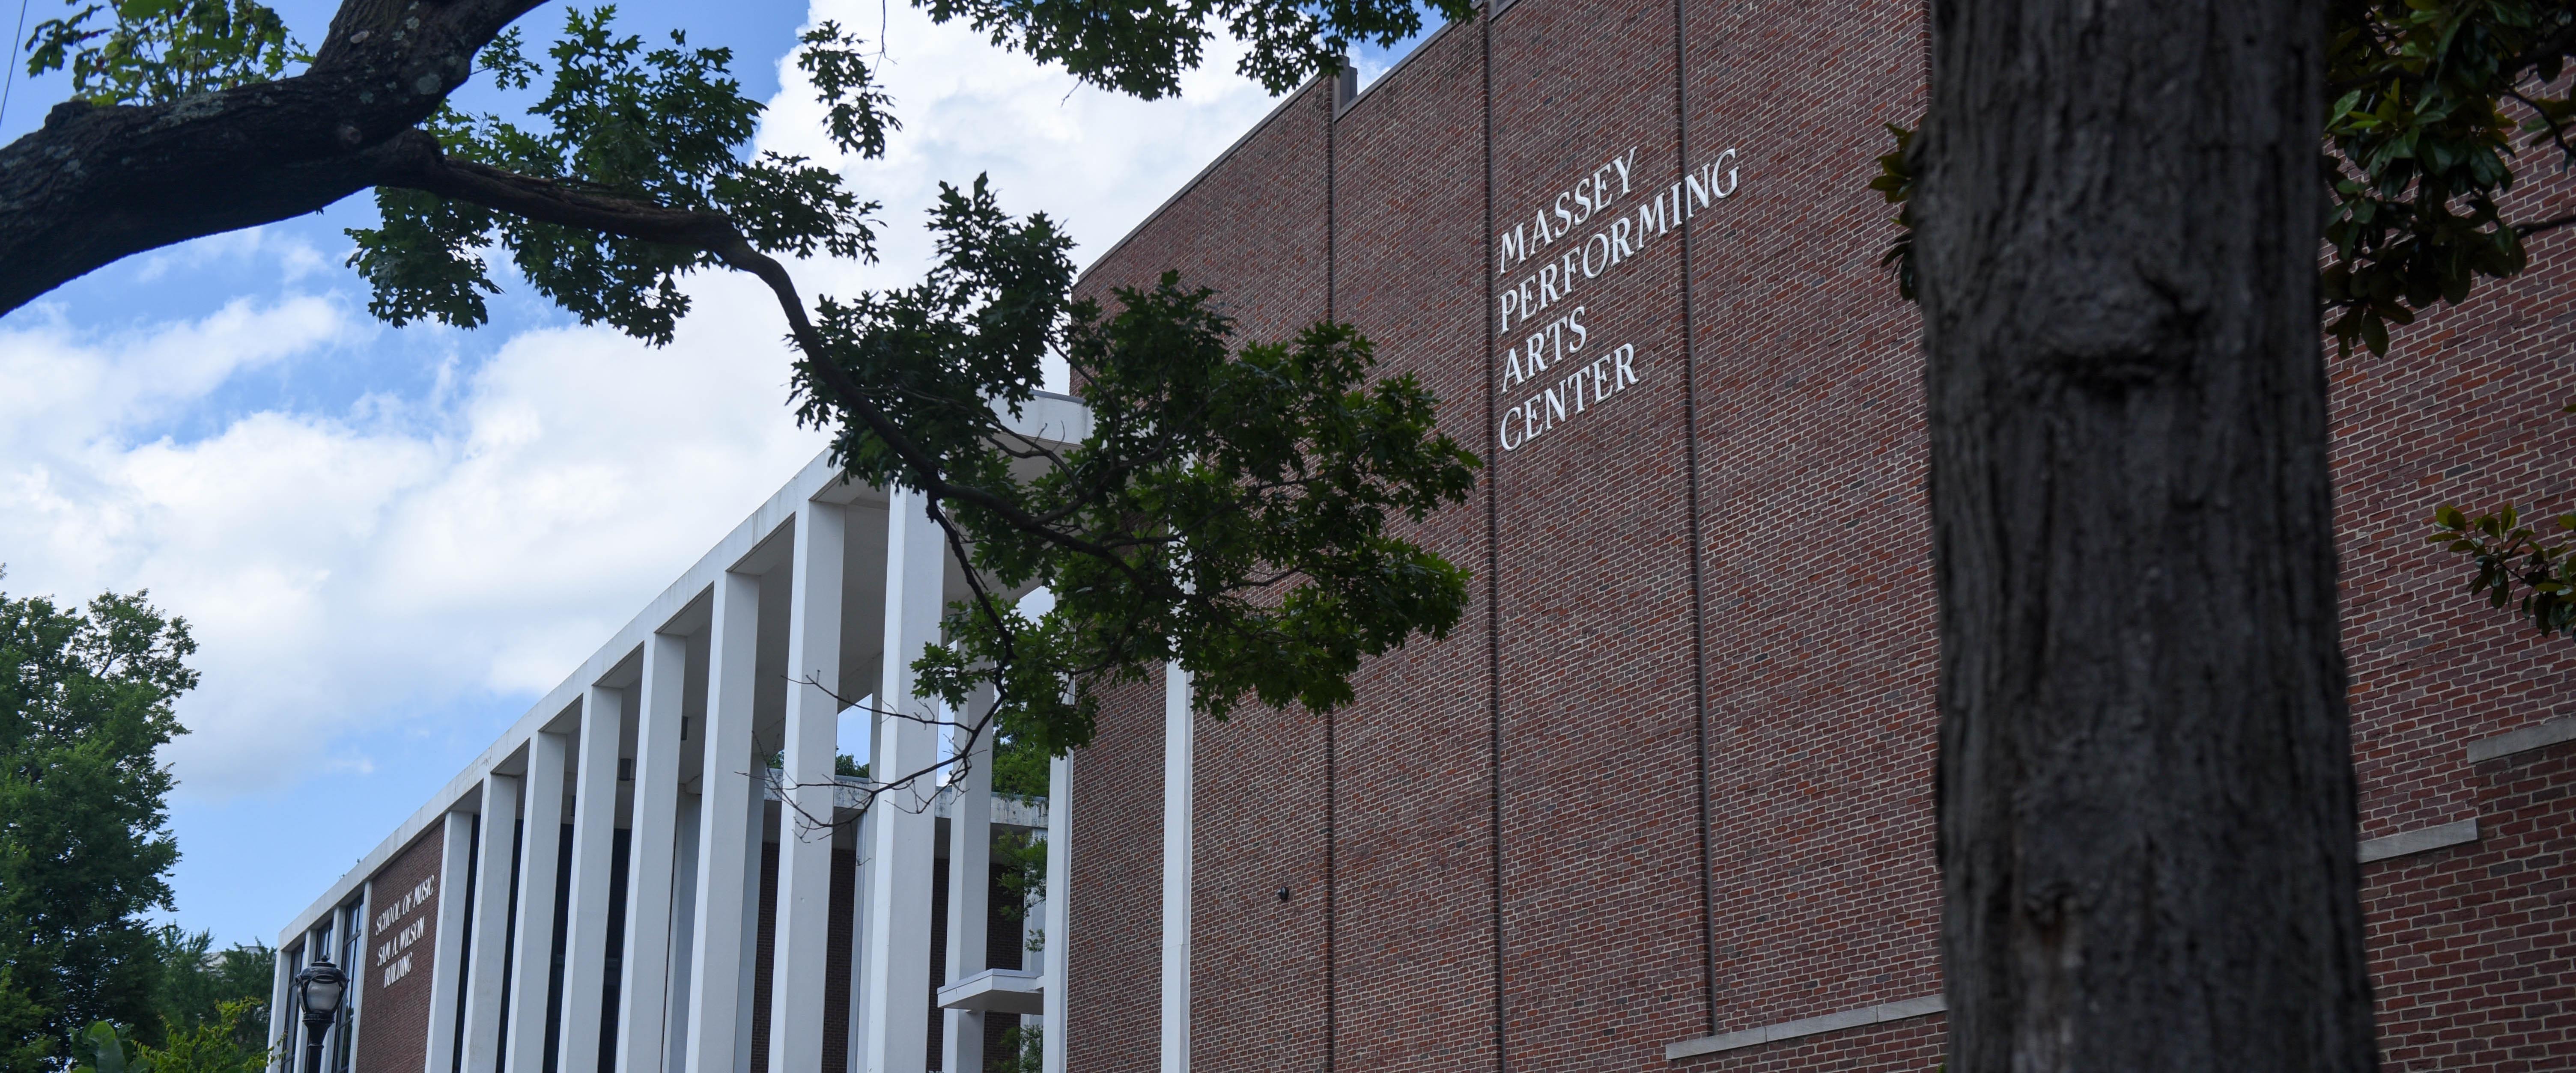 Exterior image of Massy Performing Art Center